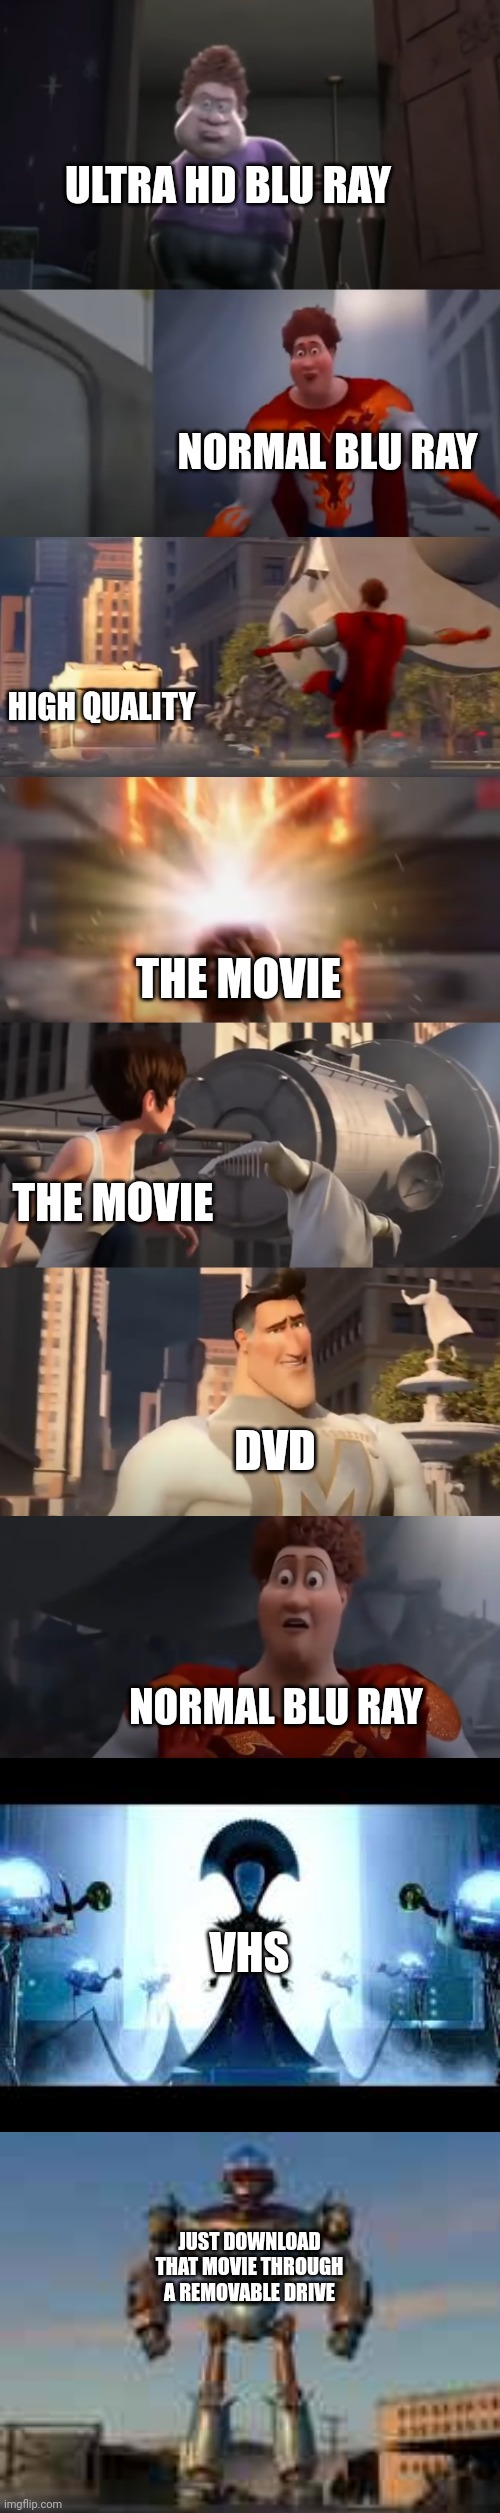 ULTRA HD BLU RAY; NORMAL BLU RAY; HIGH QUALITY; THE MOVIE; THE MOVIE; DVD; NORMAL BLU RAY; VHS; JUST DOWNLOAD THAT MOVIE THROUGH A REMOVABLE DRIVE | image tagged in snotty boy glow up meme extended,movies,dvd,bluray,blu ray,vhs | made w/ Imgflip meme maker